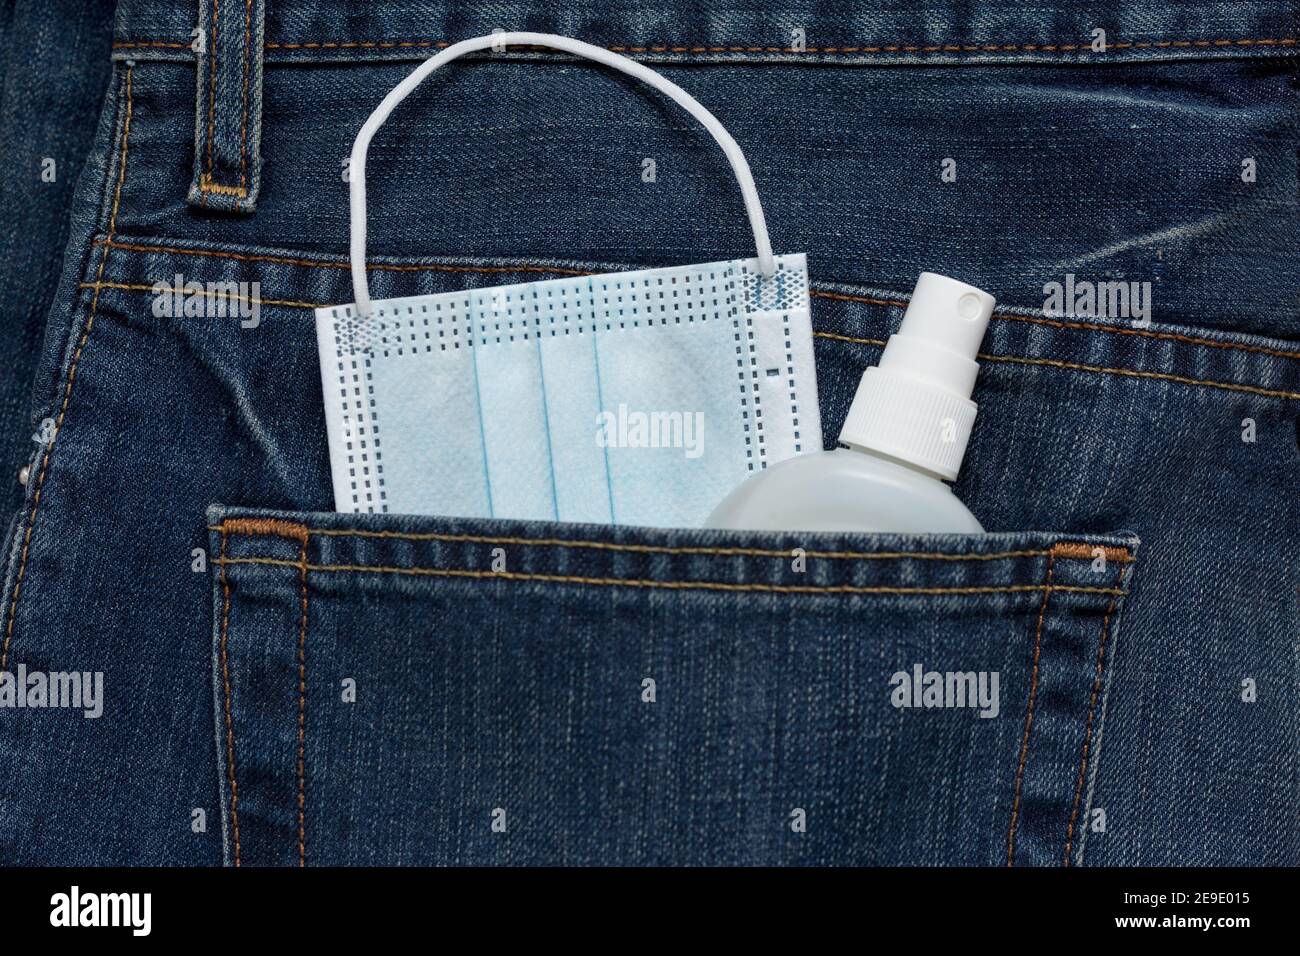 Protective face mask and hand sanitizer spray is lying in back pocket of blue jeans. Concept for new lifestyle after COVID-19 coronavirus pandemic. Stock Photo